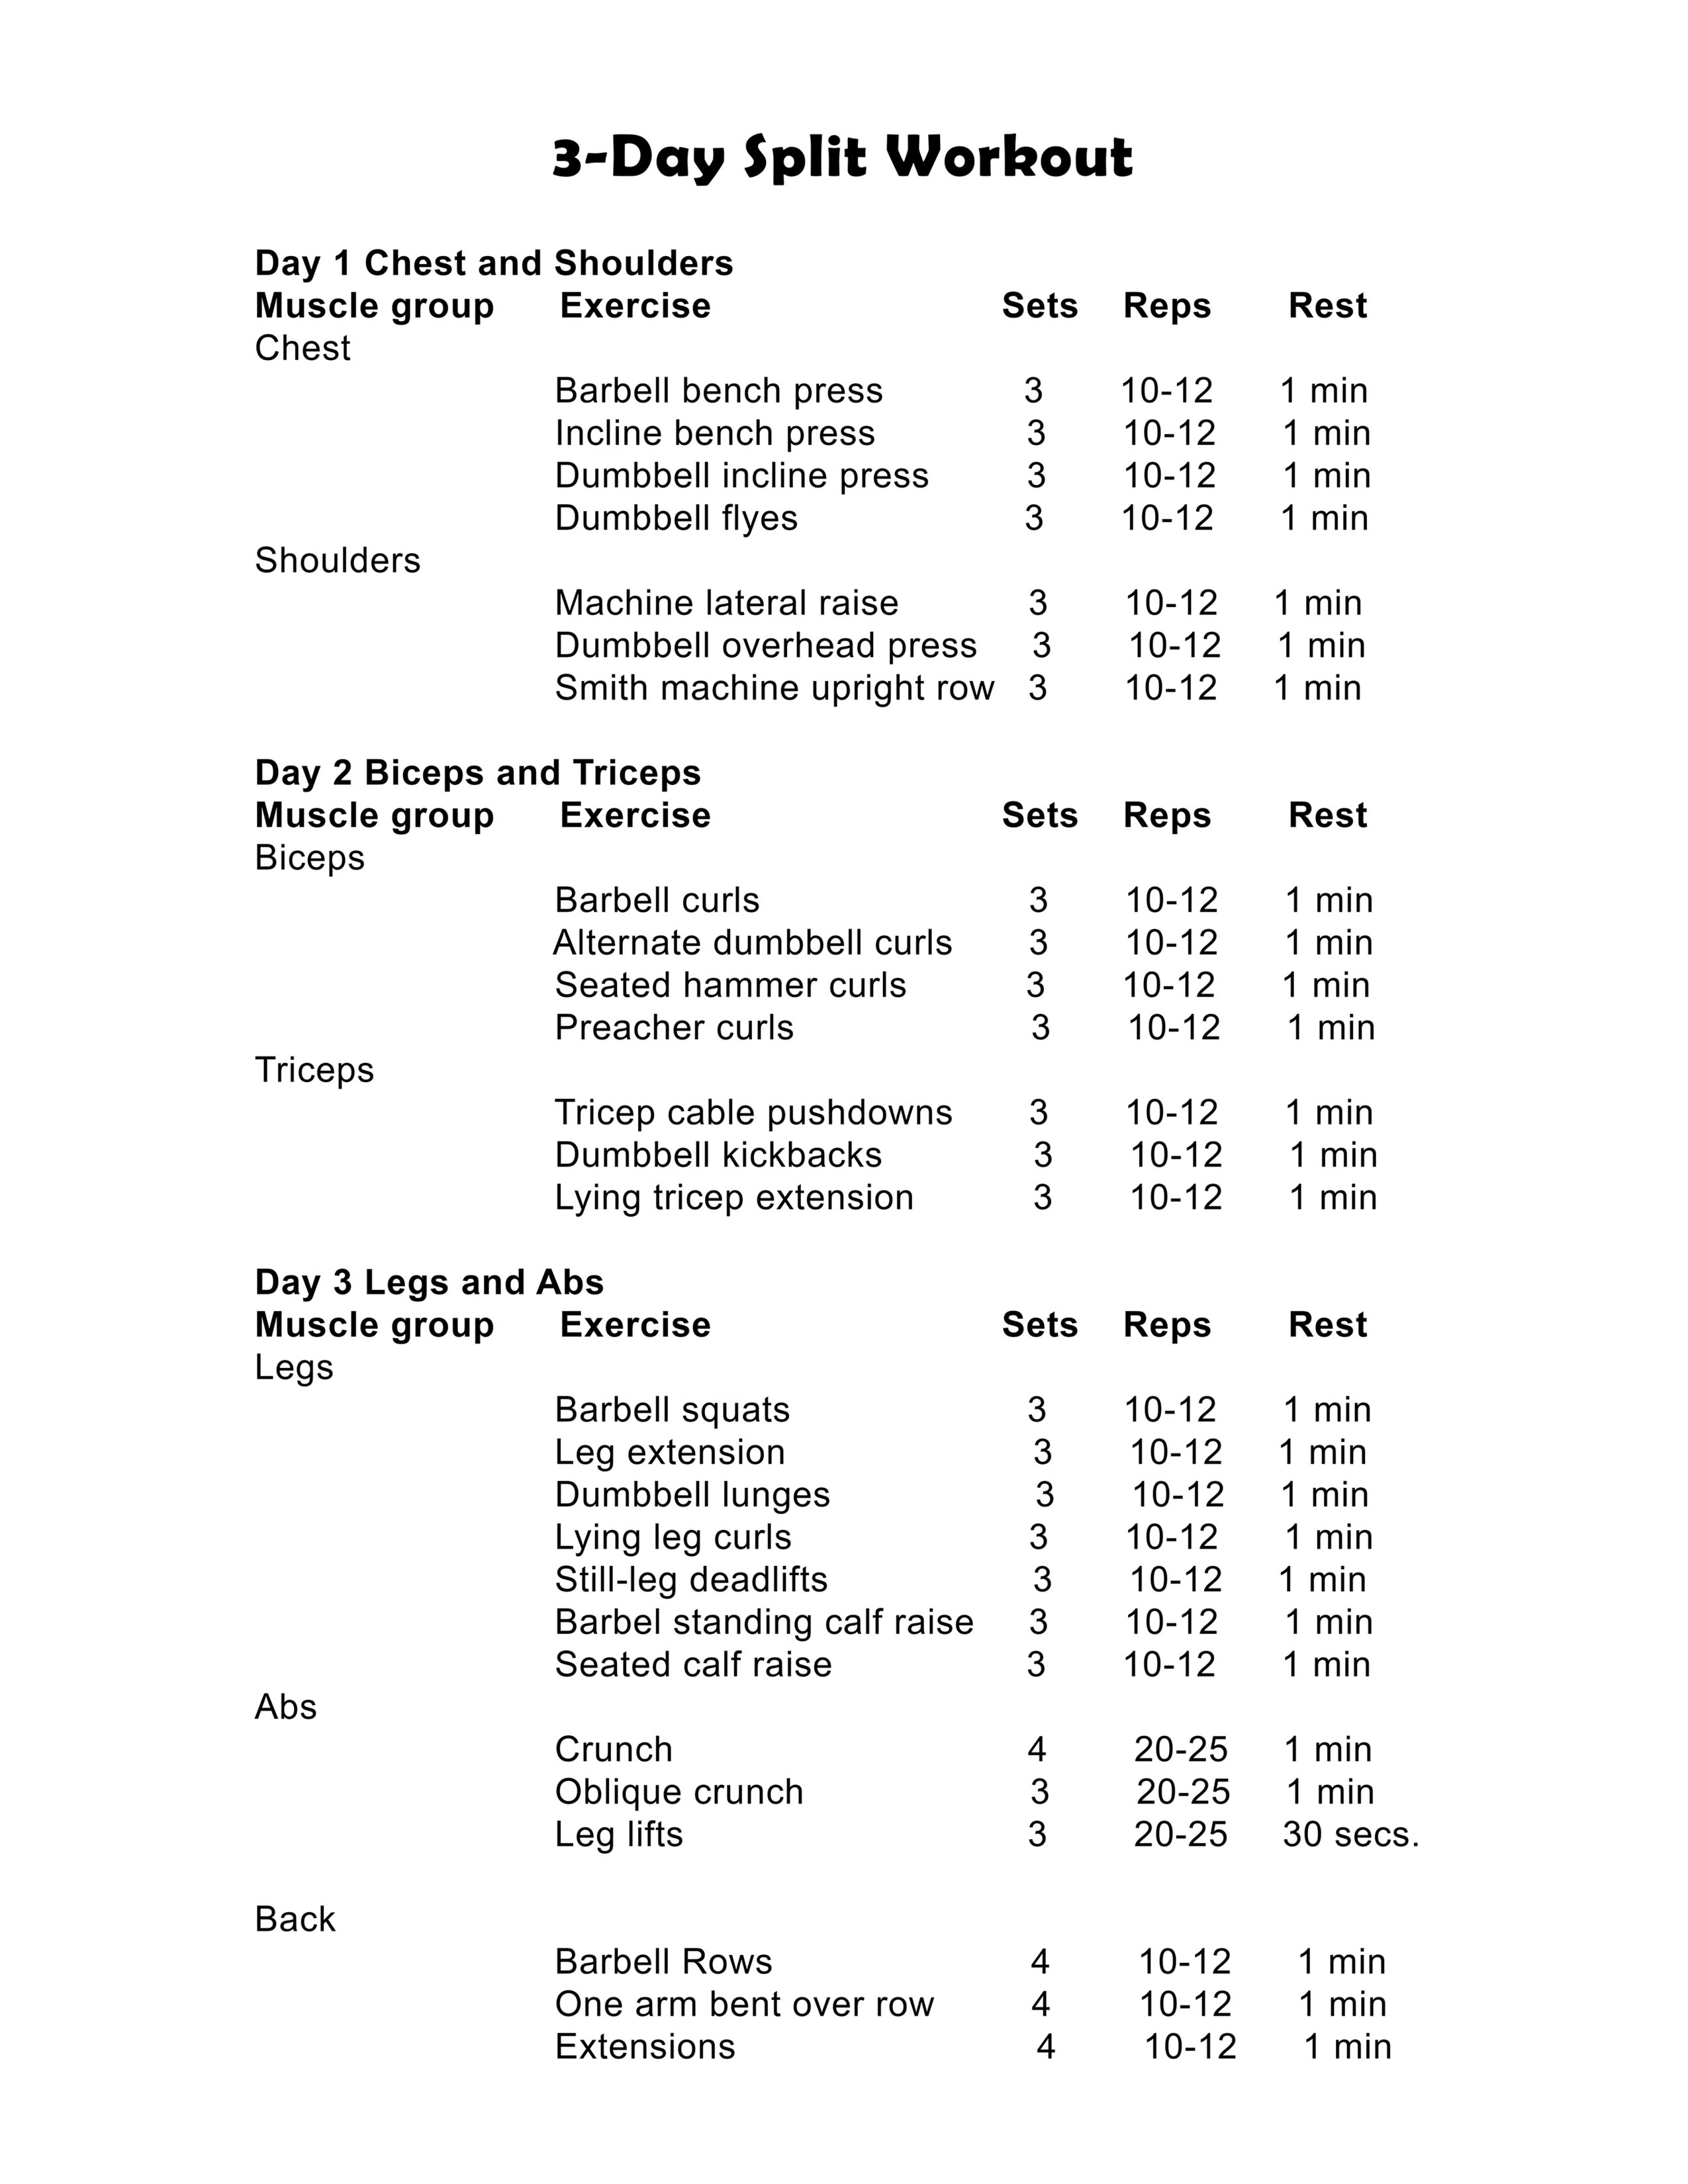 3 day split workout chart you can download and print.